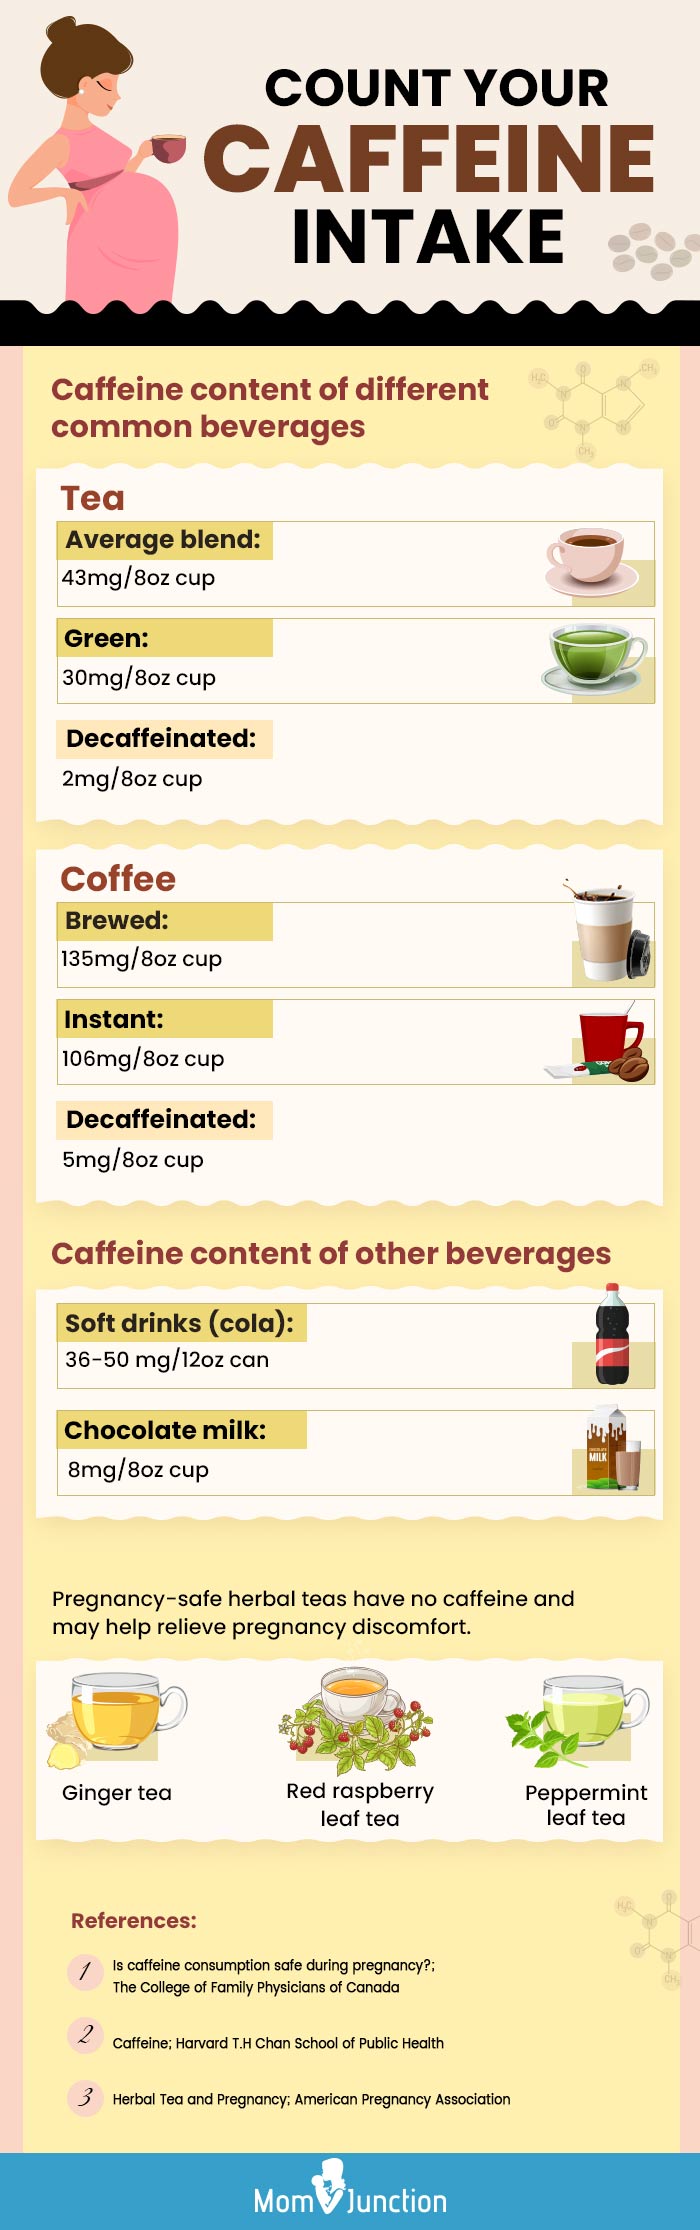 count your caffeine intake (infographic)